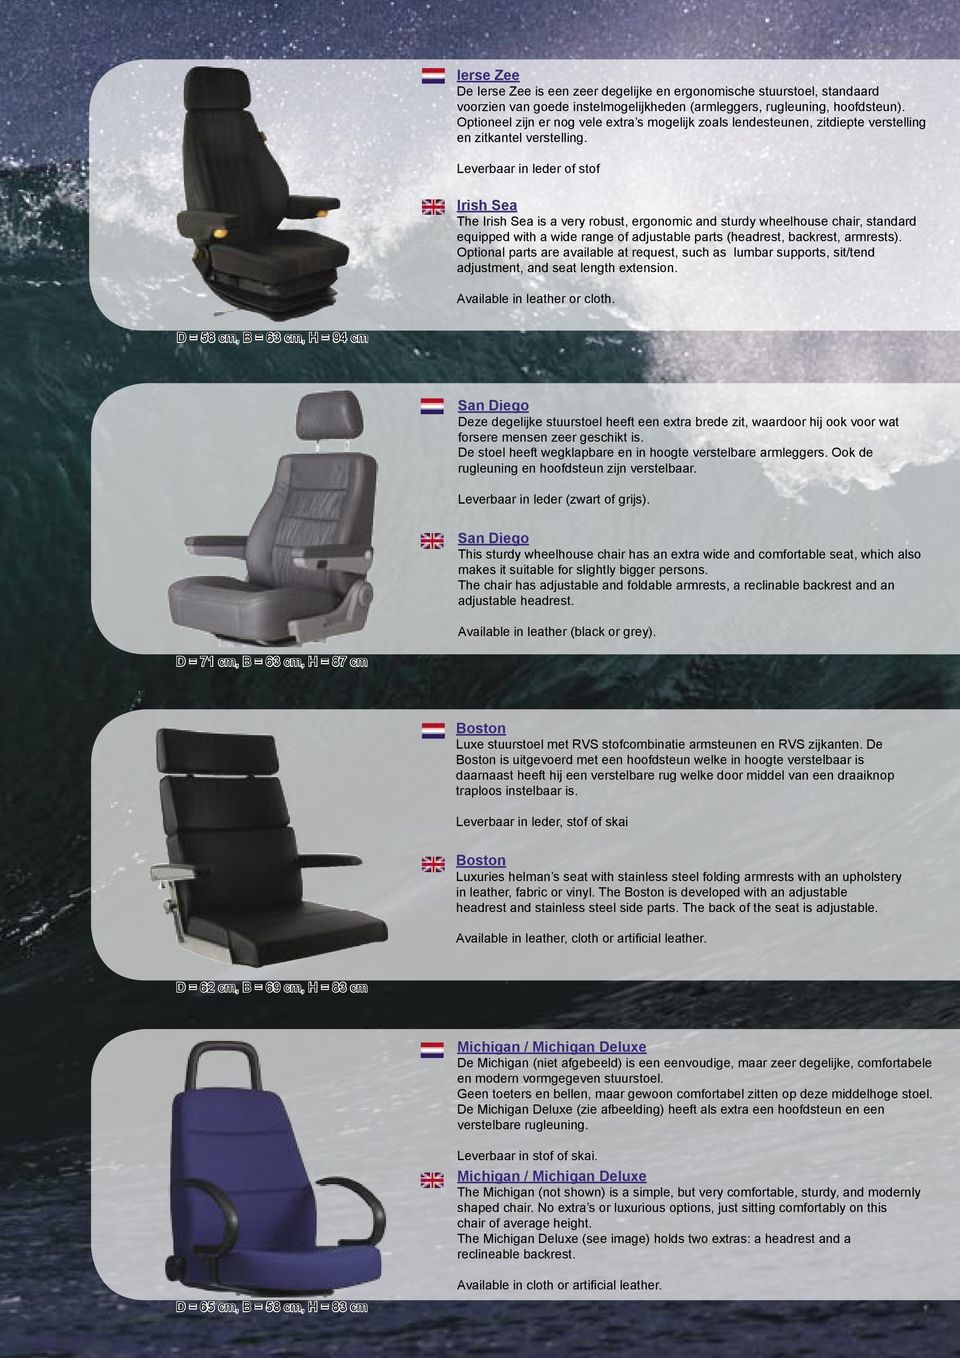 Leverbaar in leder of stof Irish Sea The Irish Sea is a very robust, ergonomic and sturdy wheelhouse chair, standard equipped with a wide range of adjustable parts (headrest, backrest, armrests).